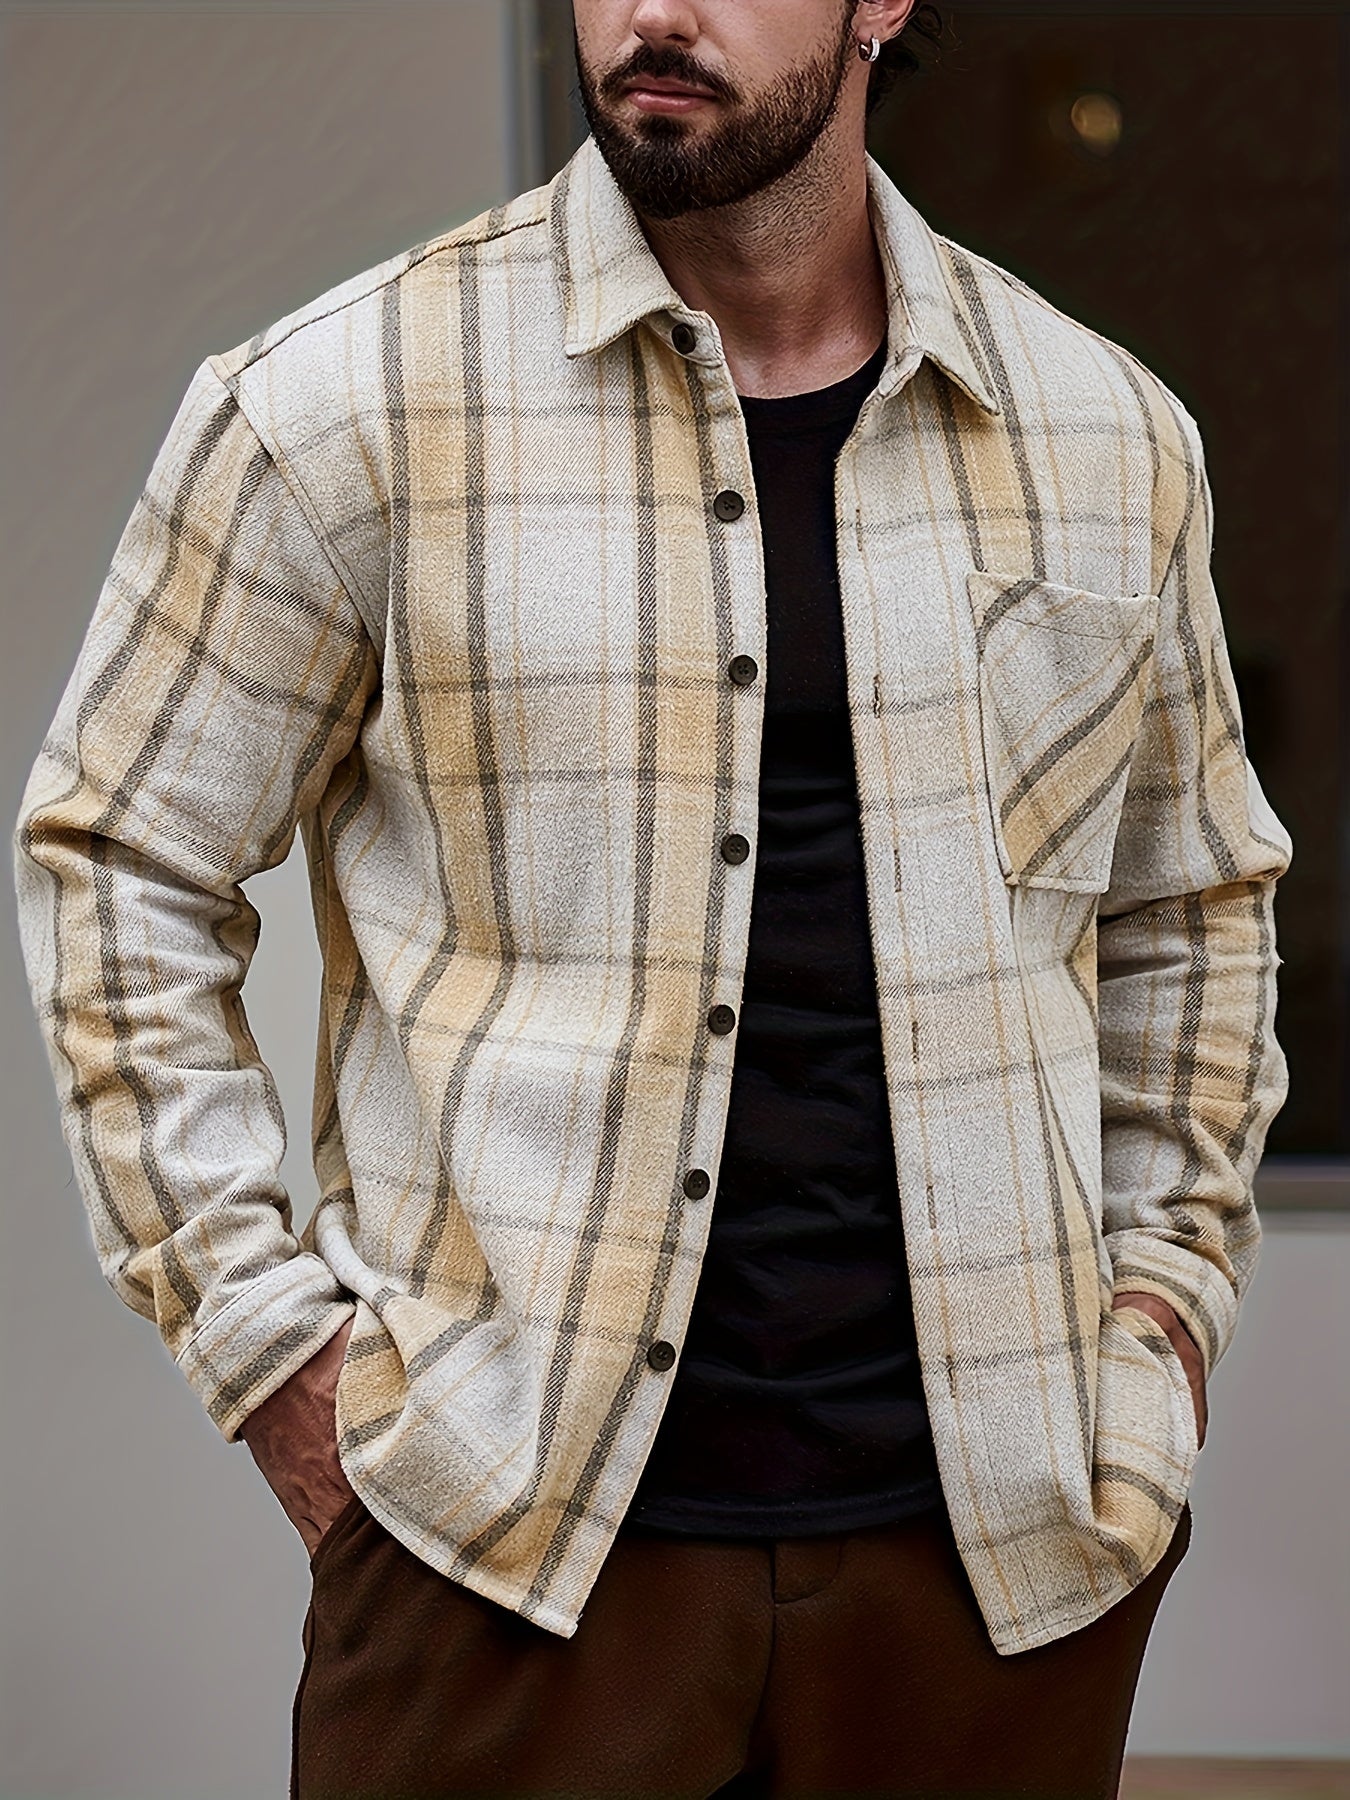 Men's Plaid Casual Shirt with Button Closure - Regular Fit for Everyday Wear